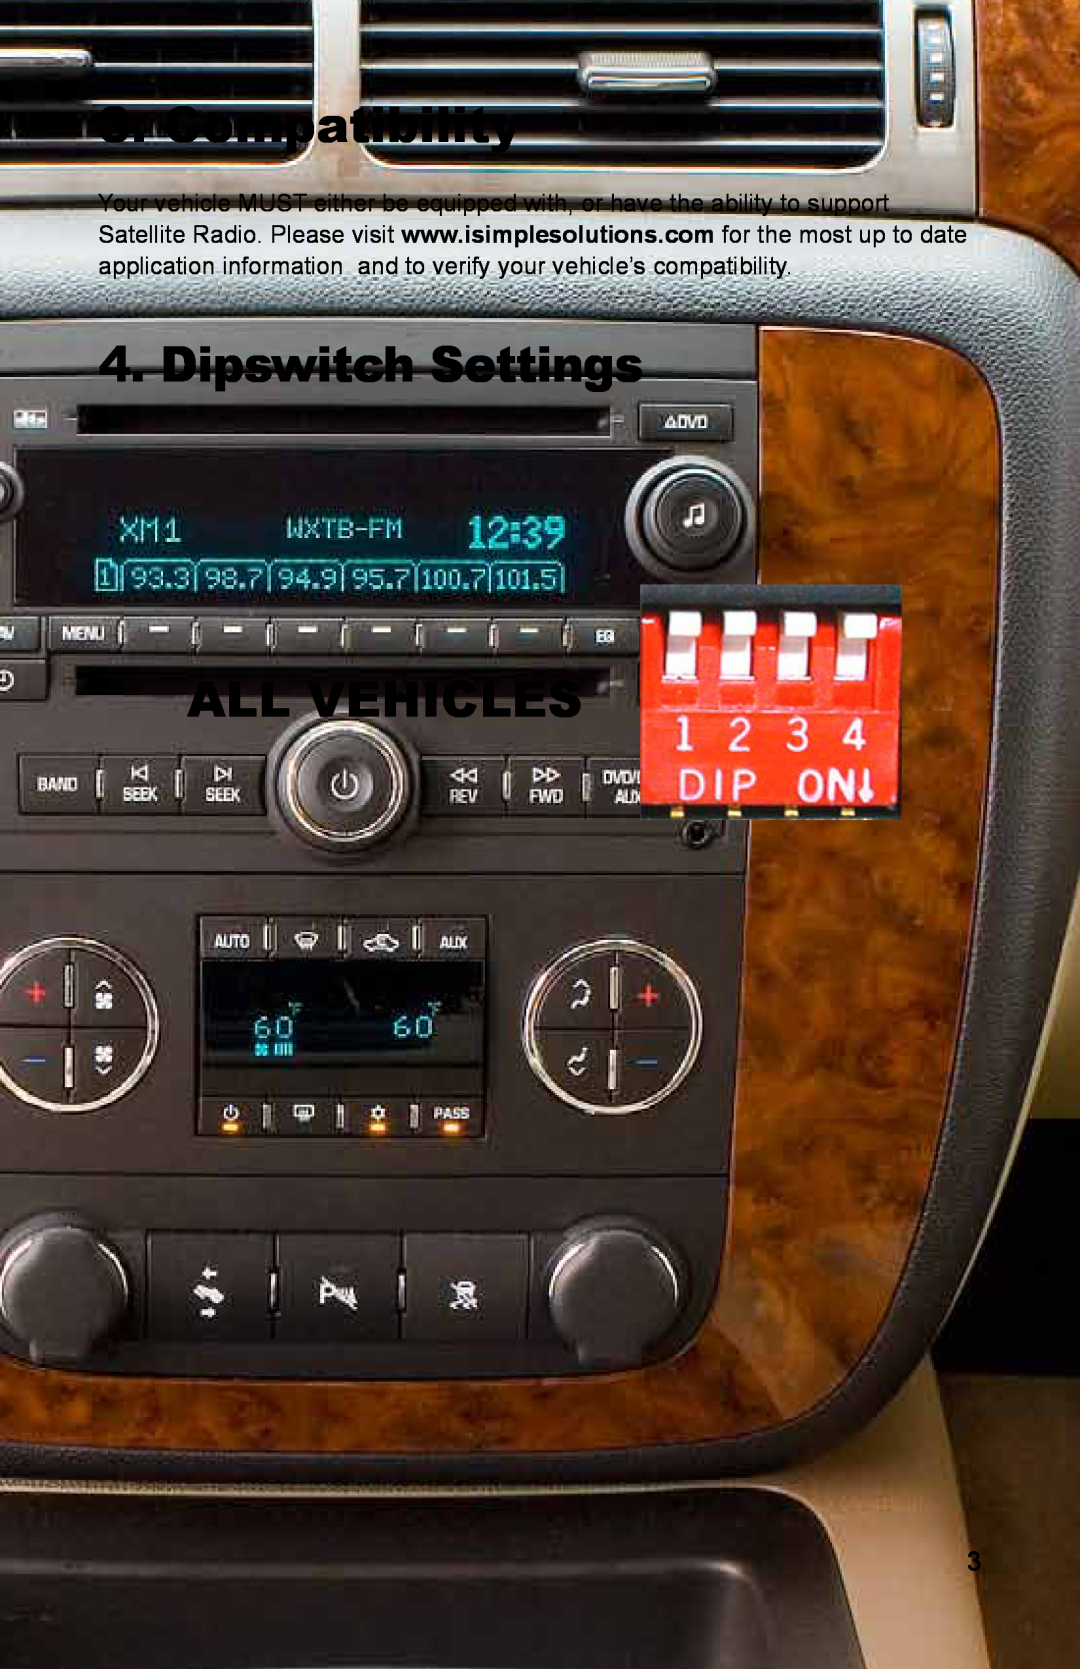 iSimple PXAMG, PGHGM1 owner manual Compatibility, Dipswitch Settings ALL VEHICLES 